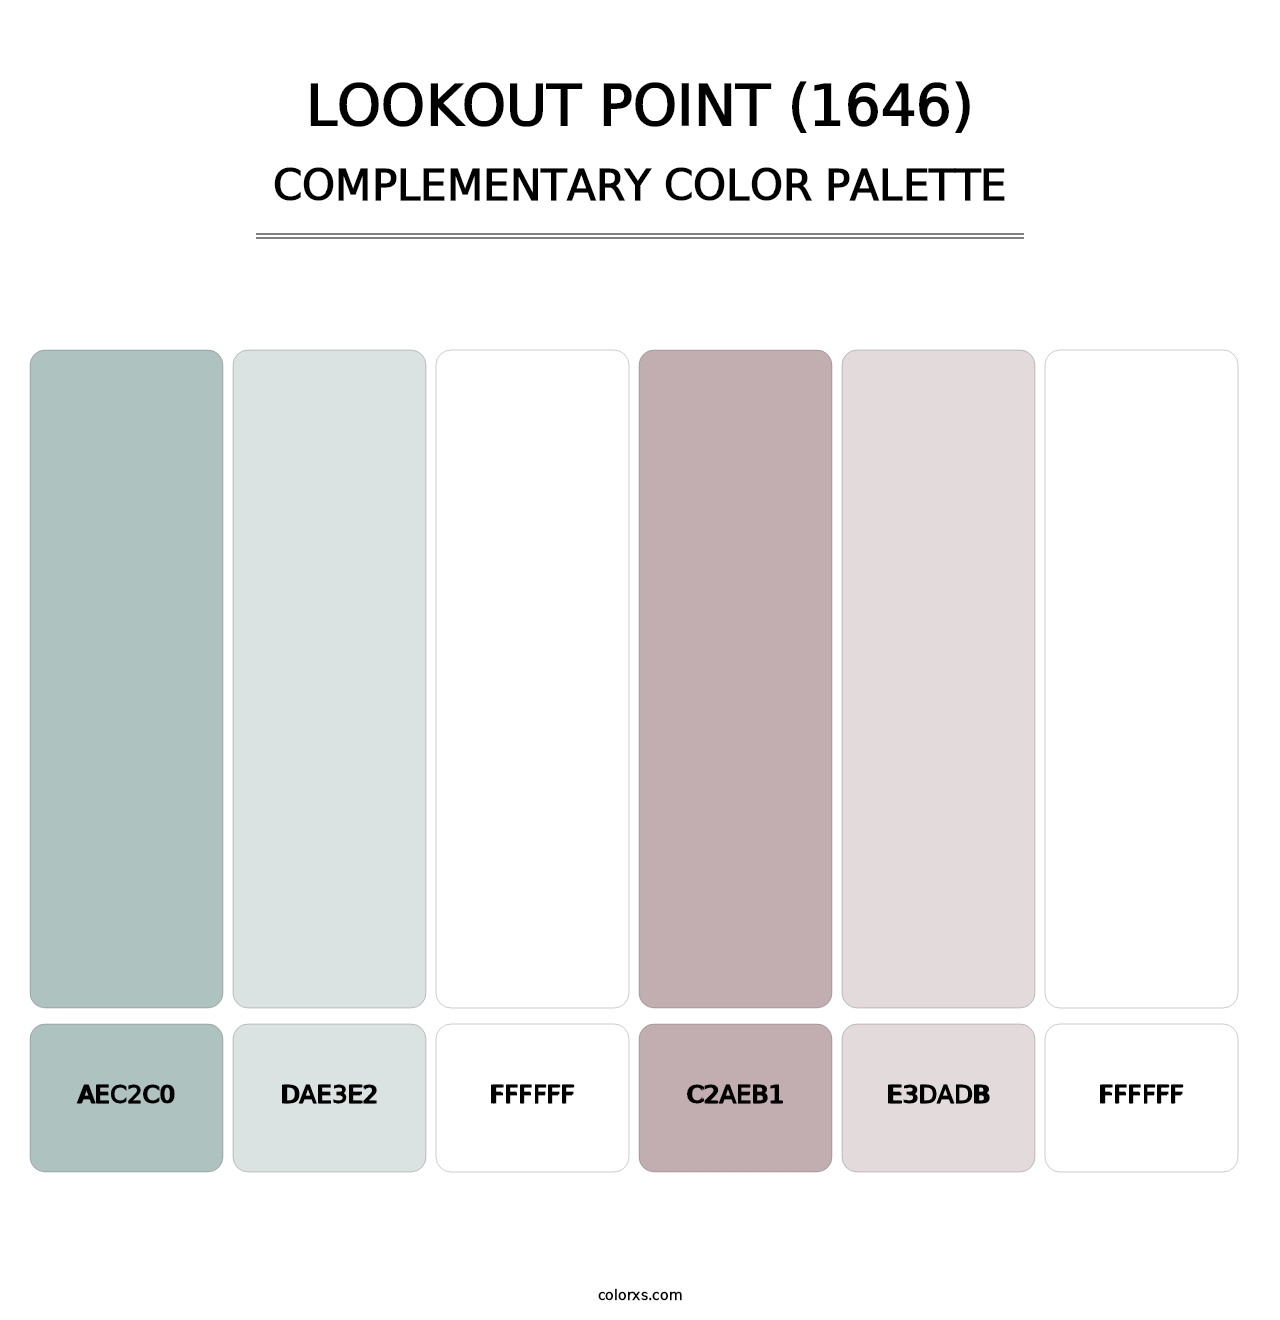 Lookout Point (1646) - Complementary Color Palette